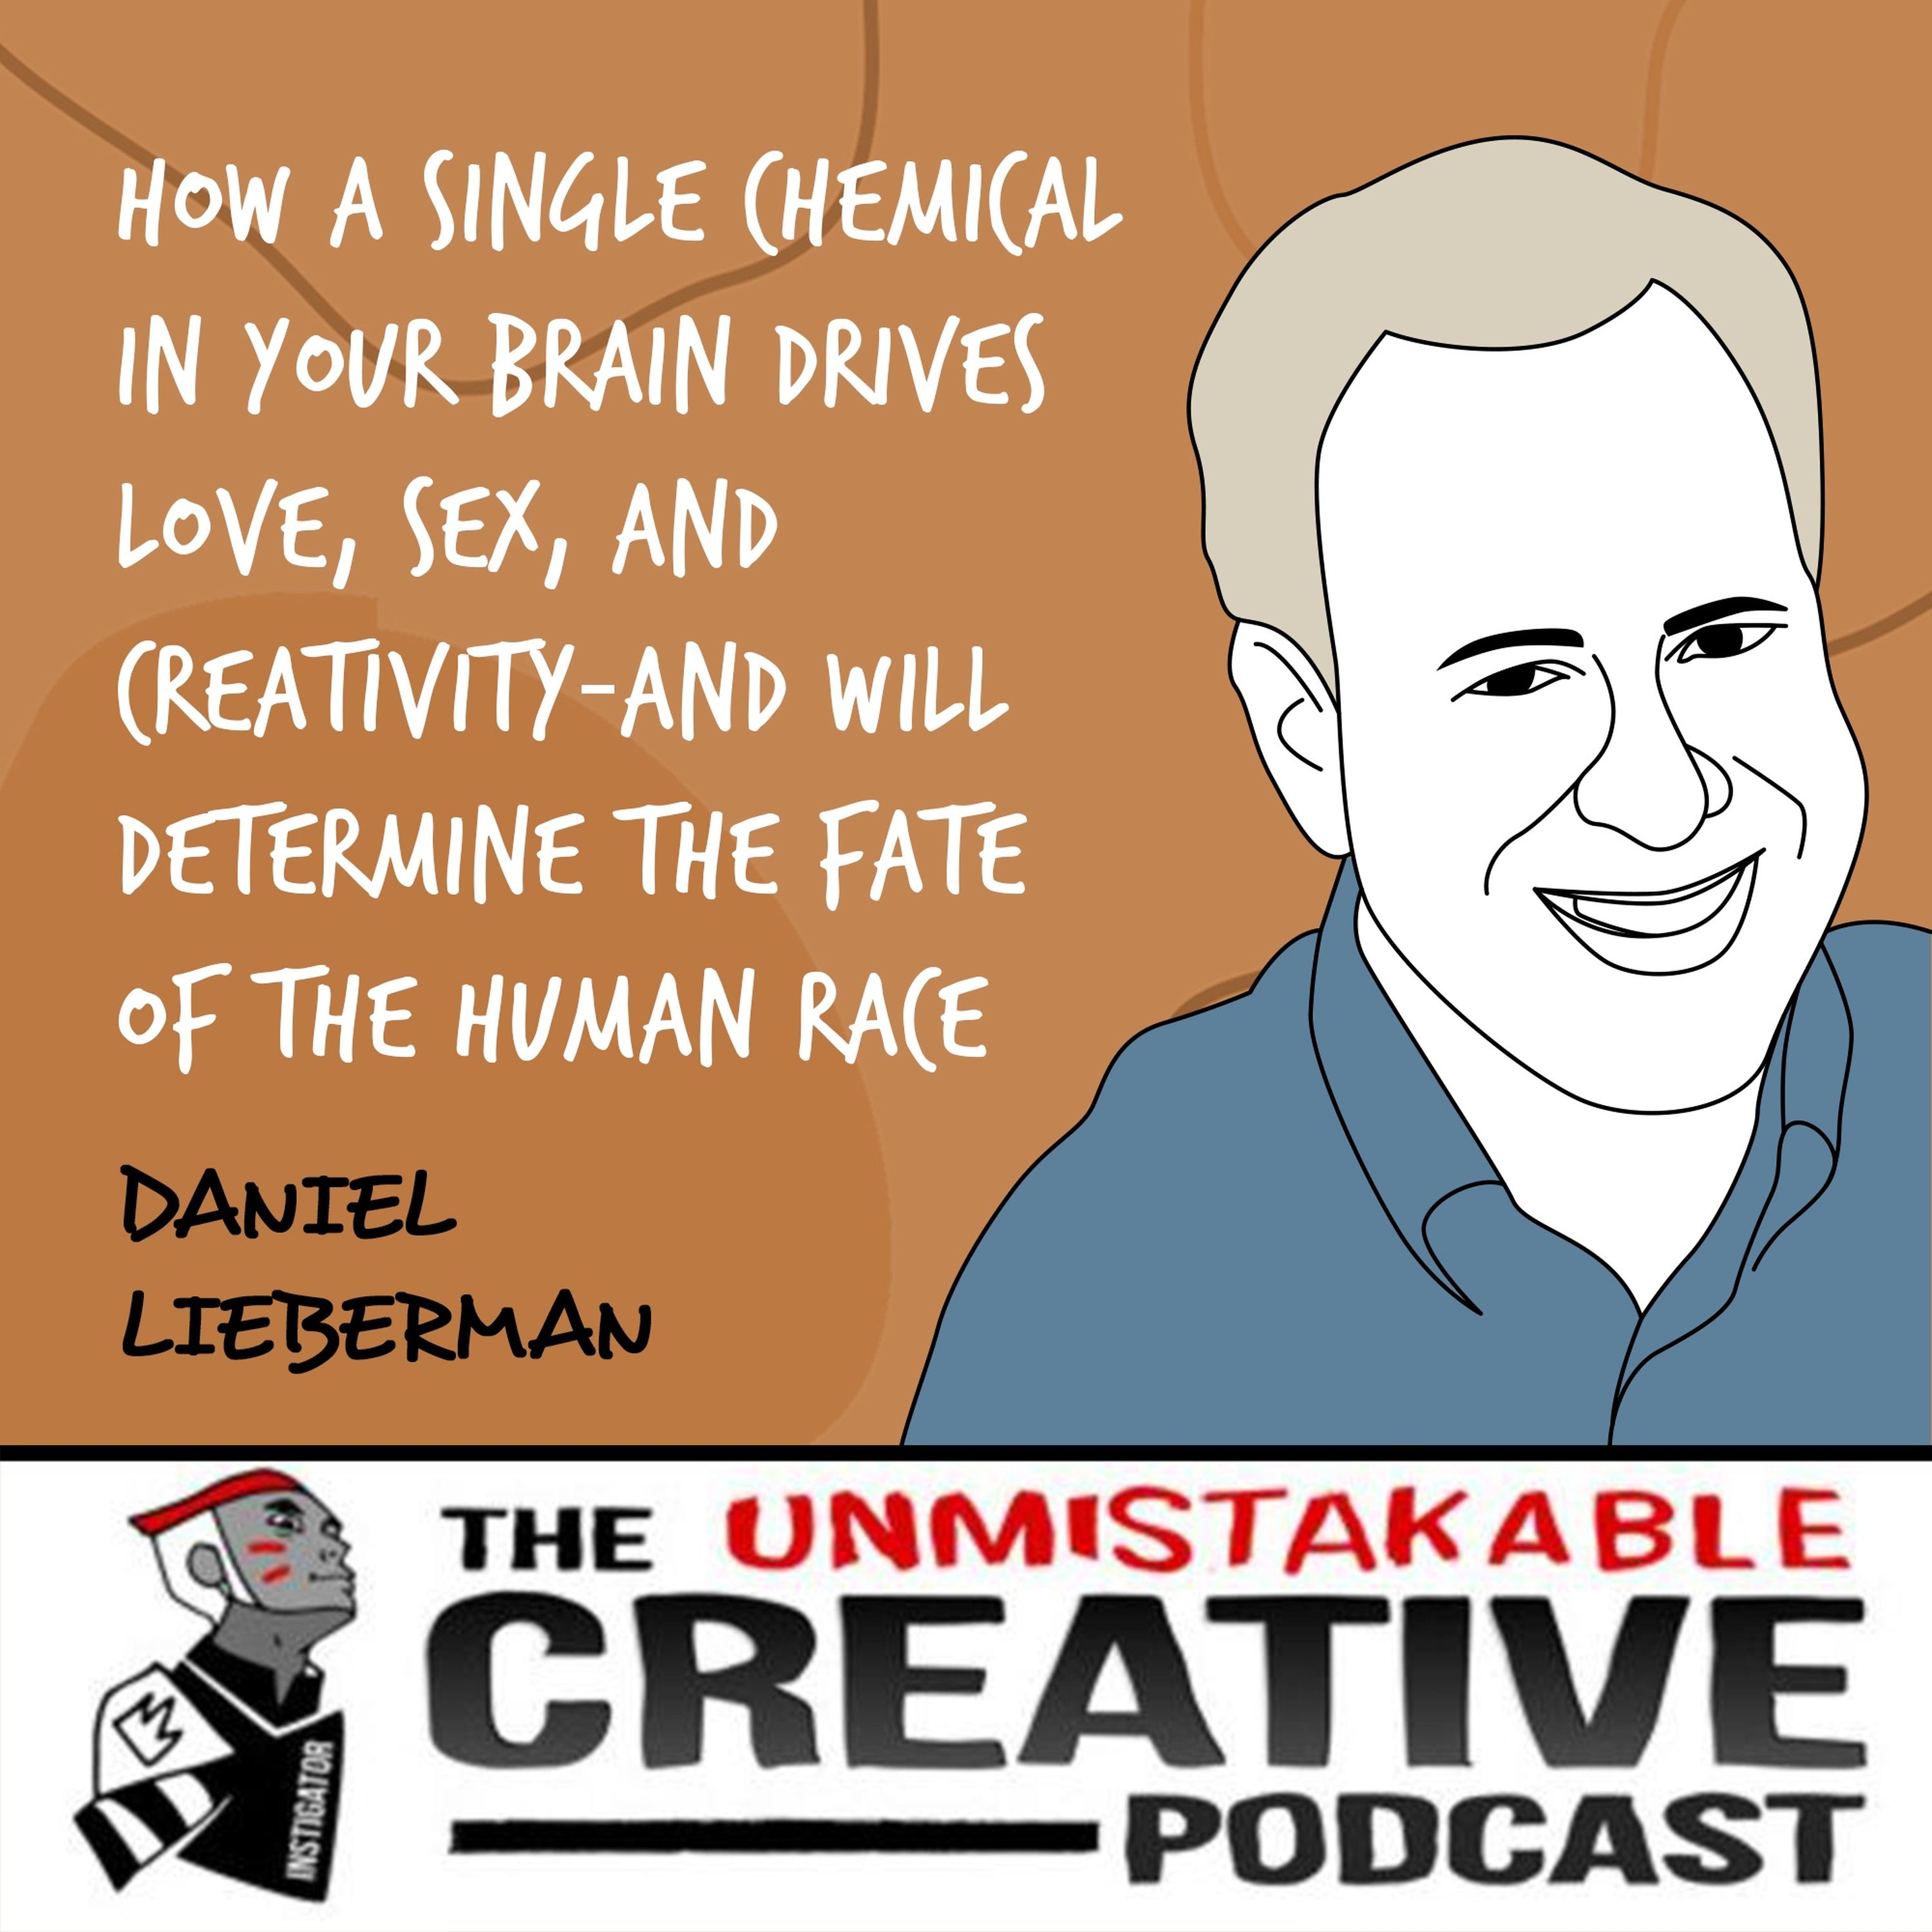 Daniel Lieberman | How a Single Chemical in Your Brain Drives Love, Sex, and Creativity―and Will Determine the Fate of the Human Race Image